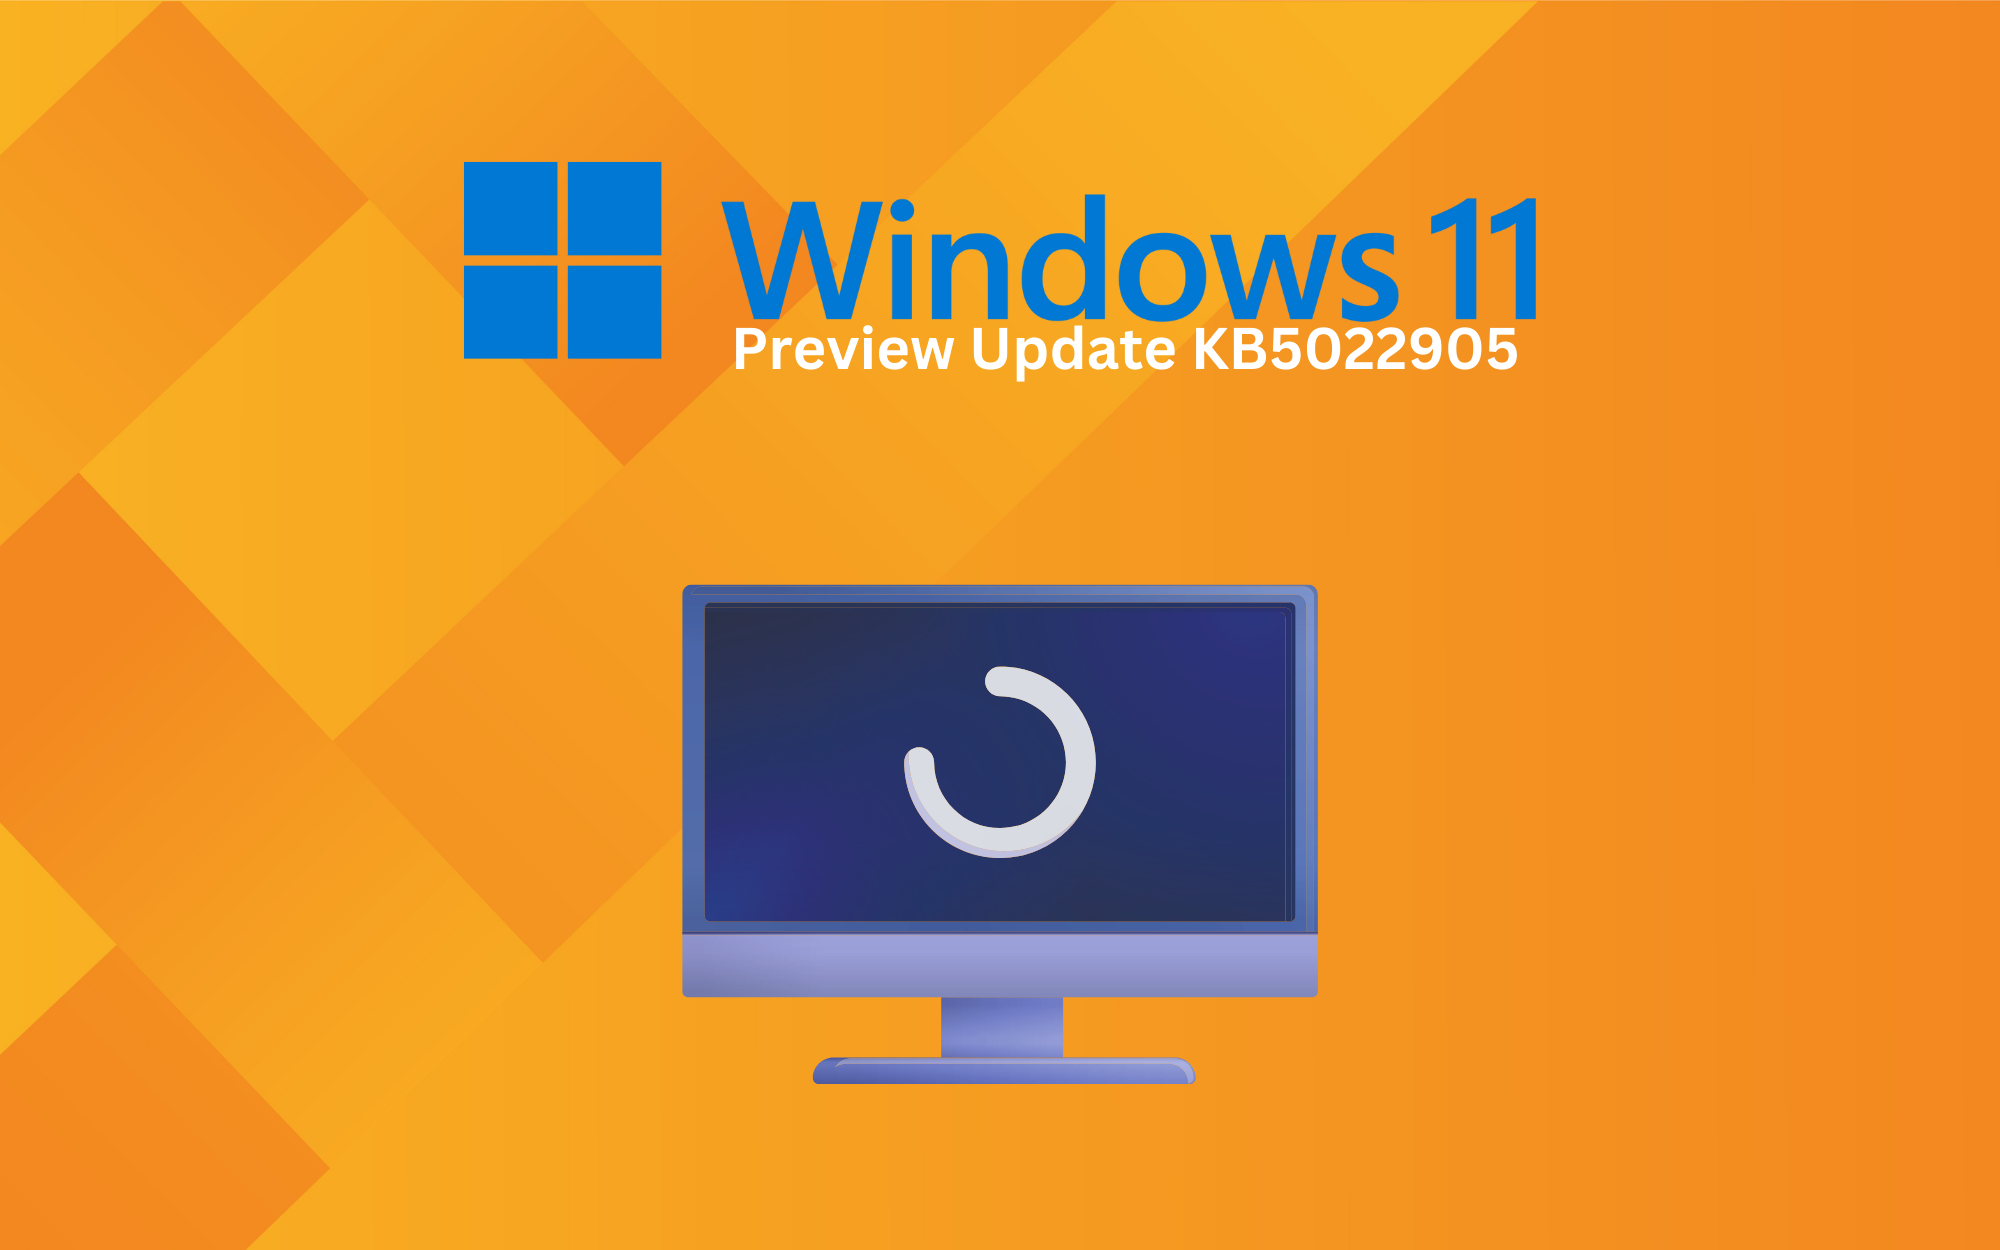 Windows 11 Preview Update: 13 Significant Changes in KB5022905 Release